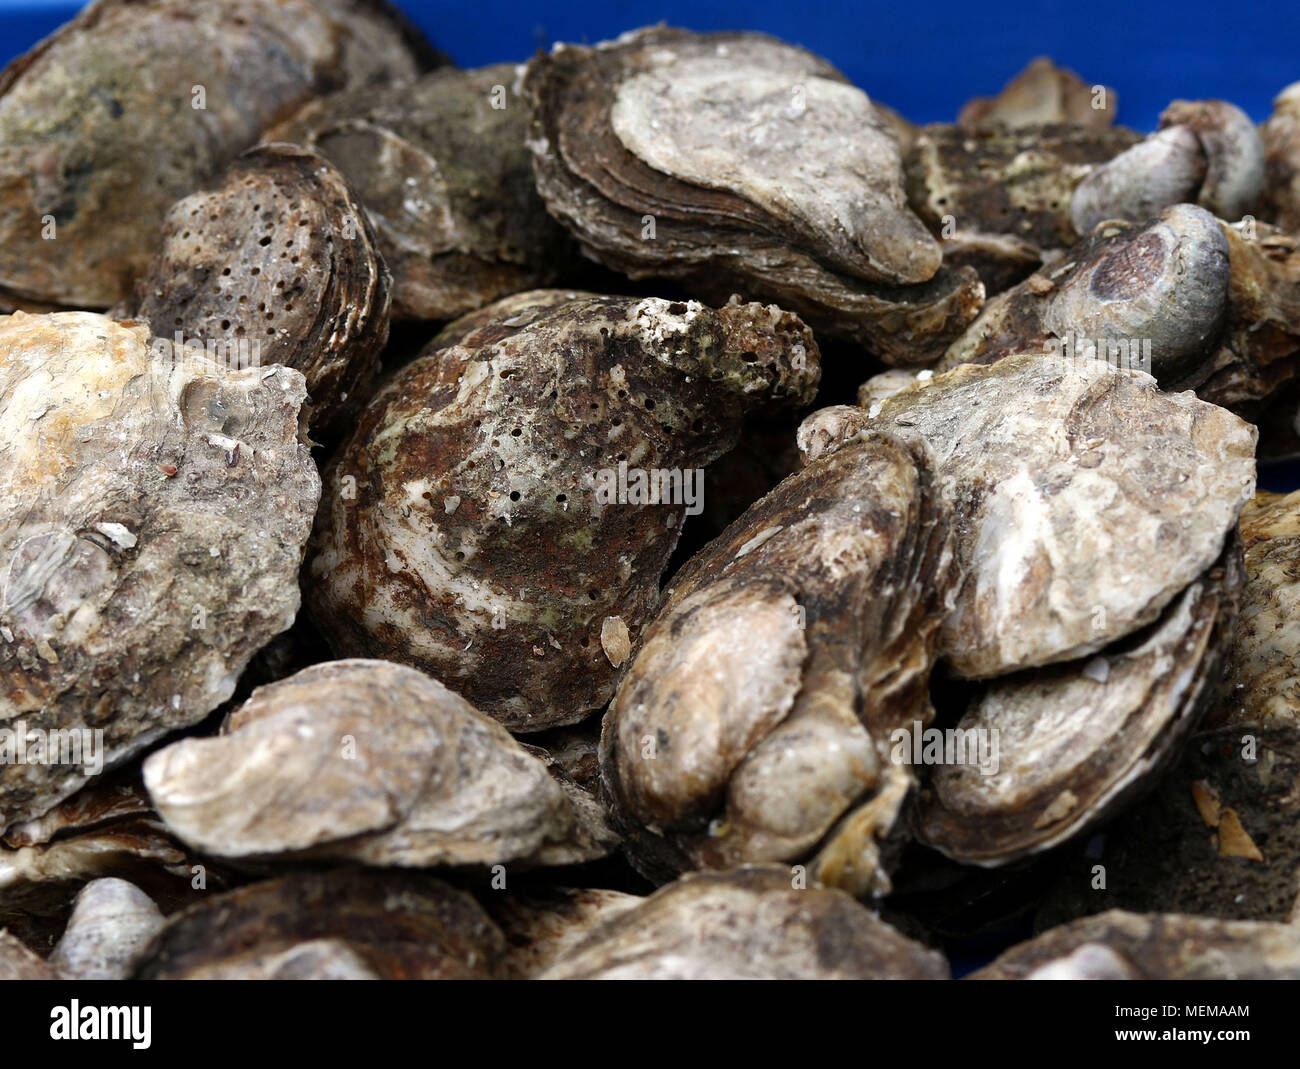 Oysters at Fish Market Stock Photo